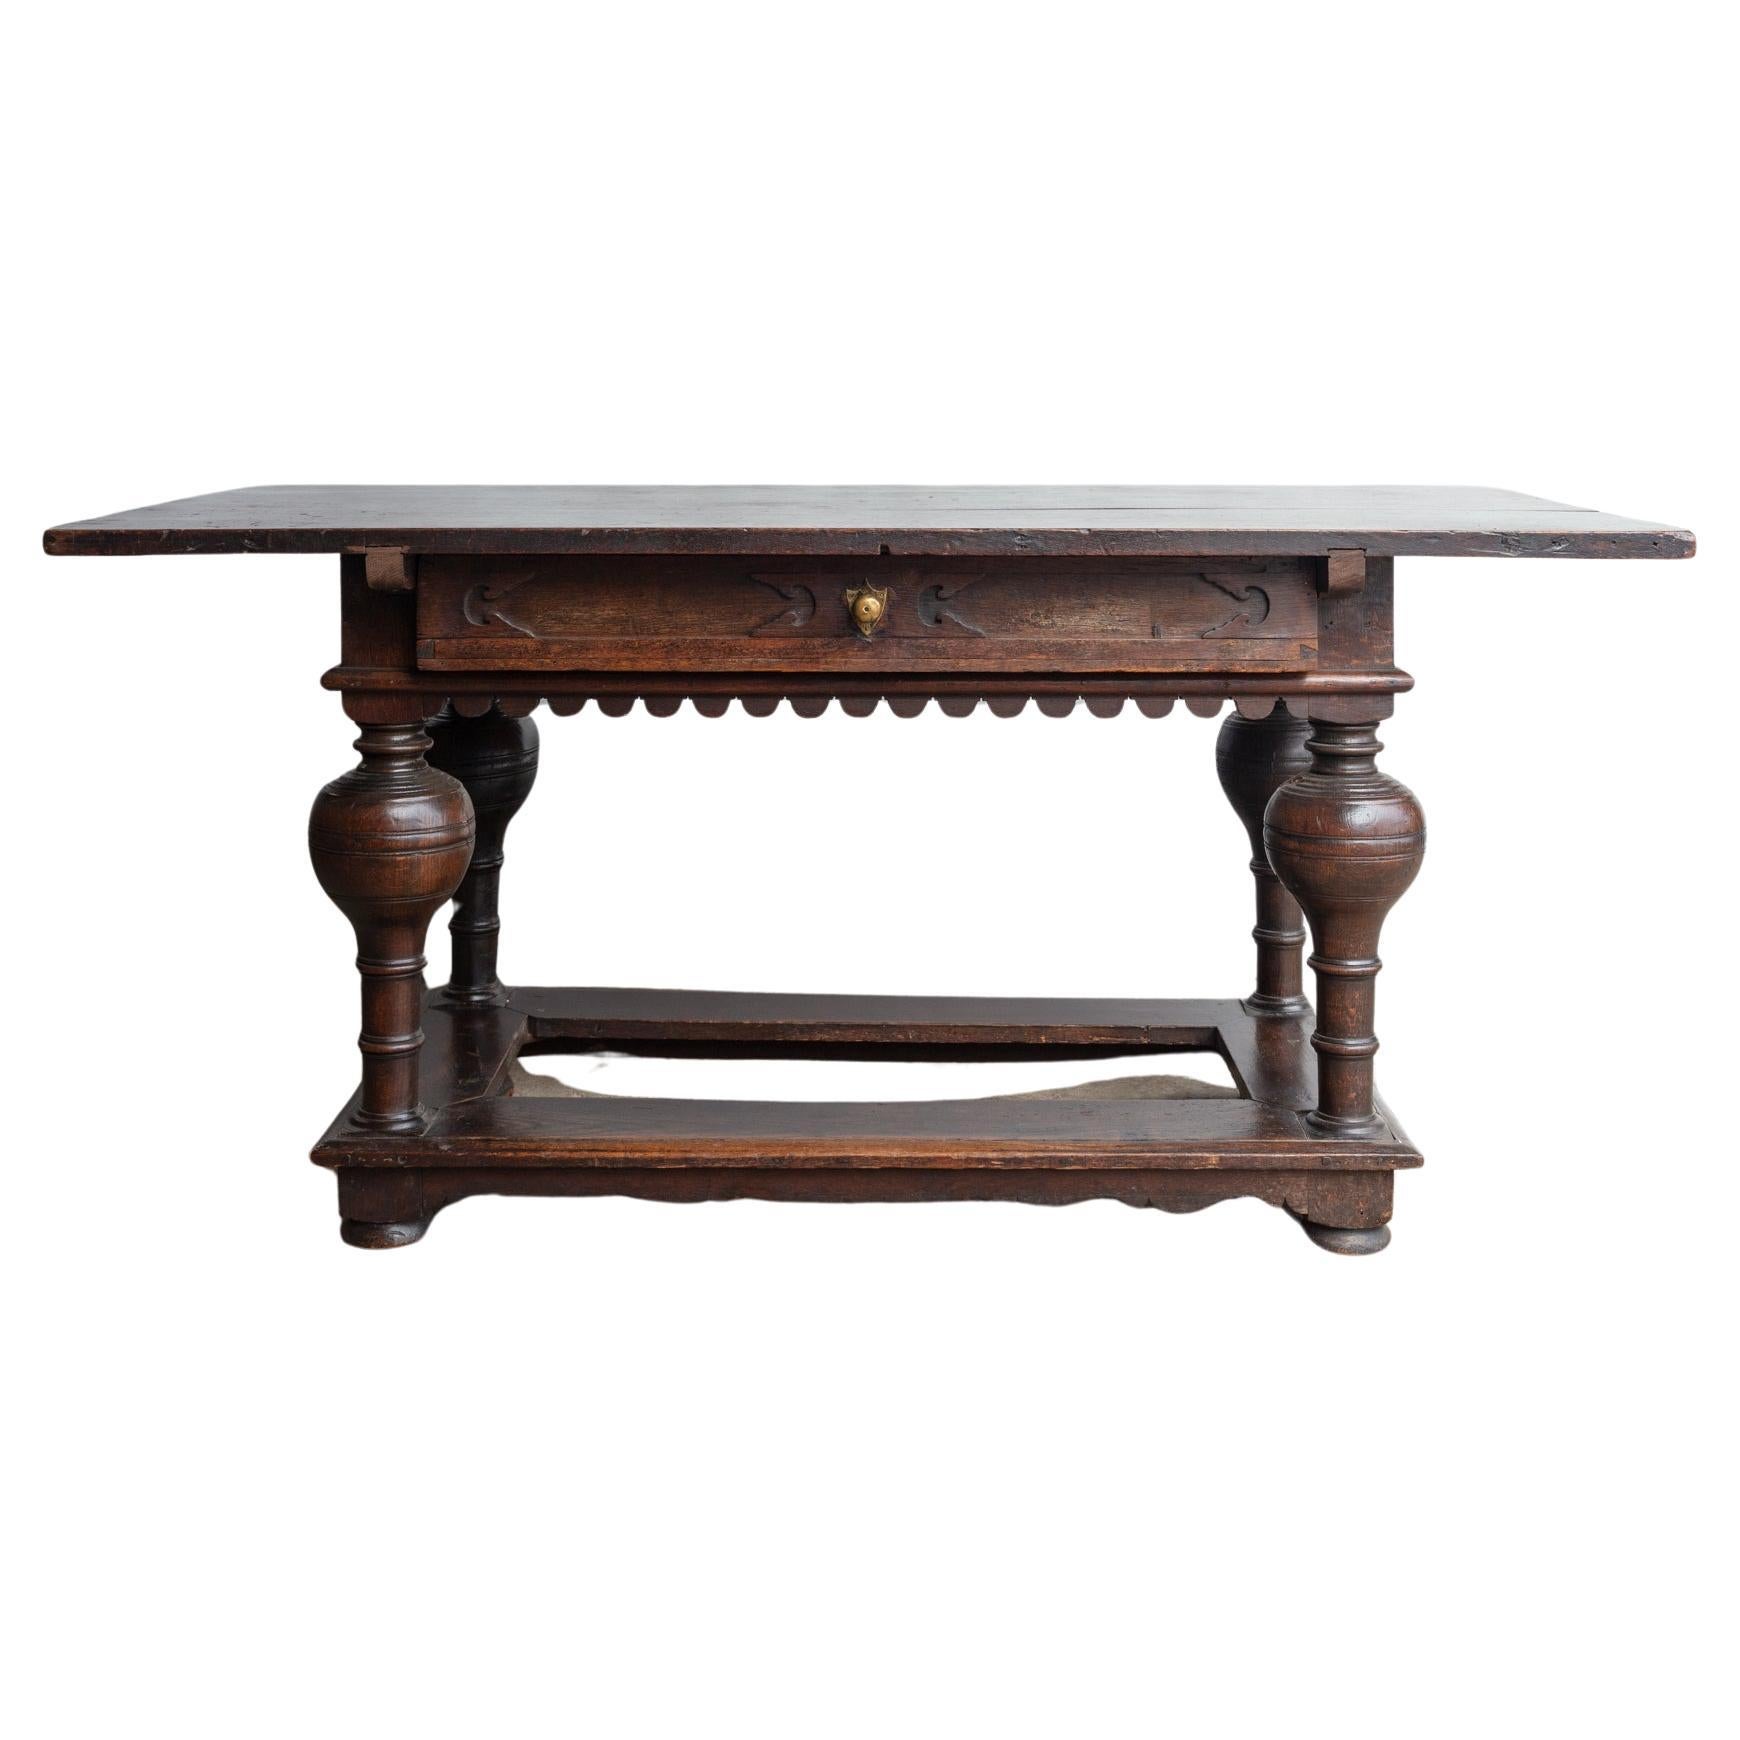 19th Century German Carved Wood Table